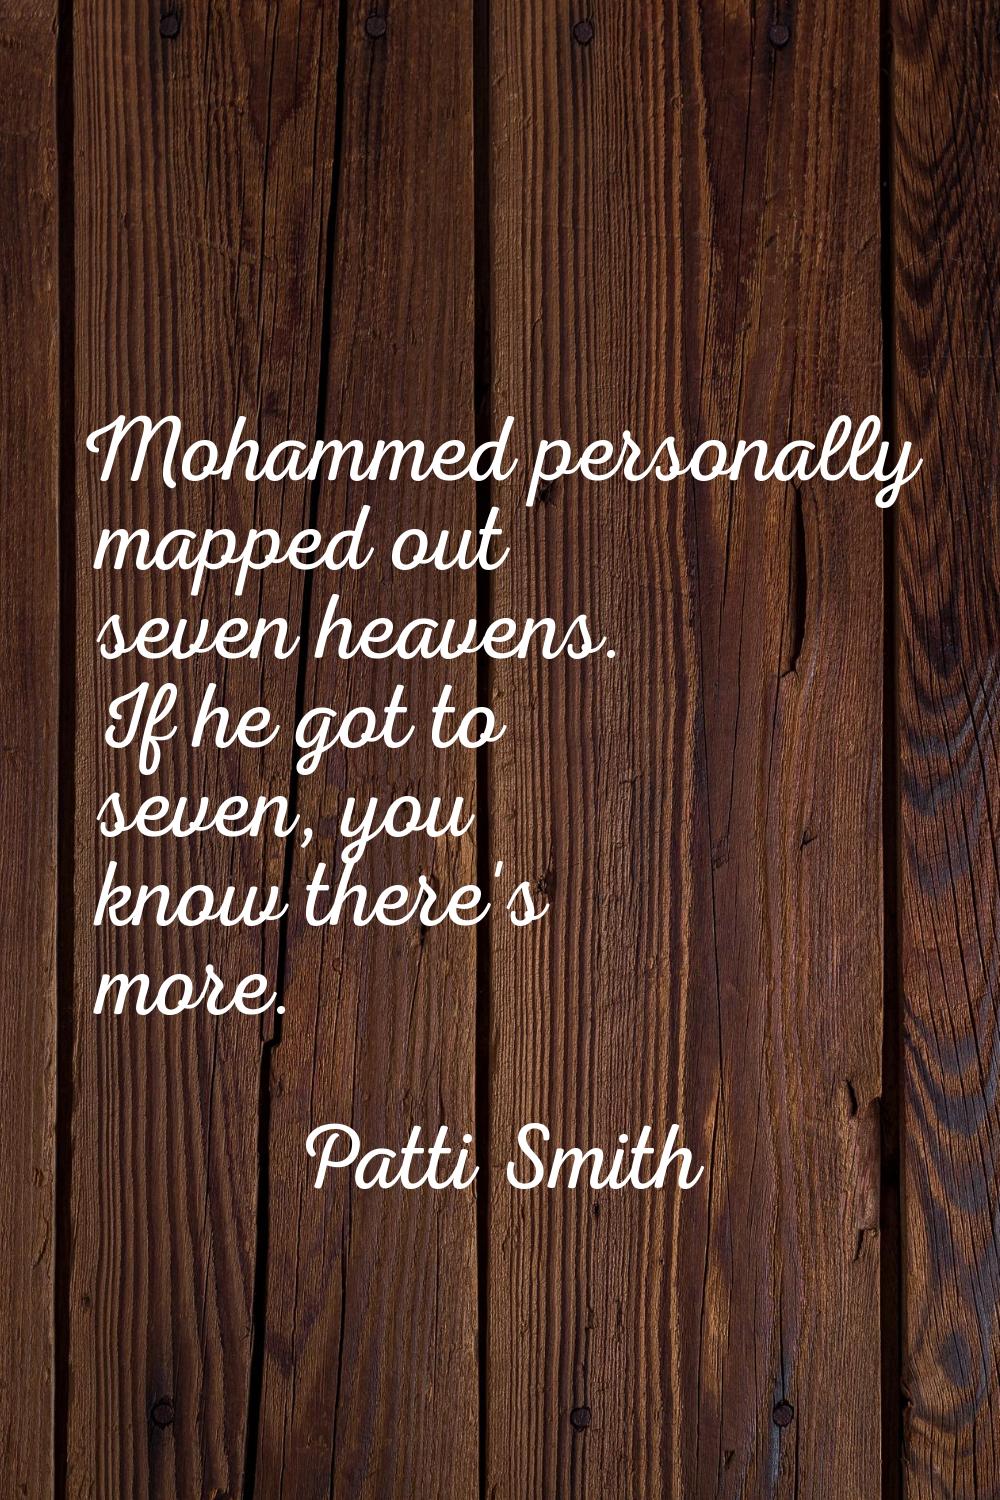 Mohammed personally mapped out seven heavens. If he got to seven, you know there's more.